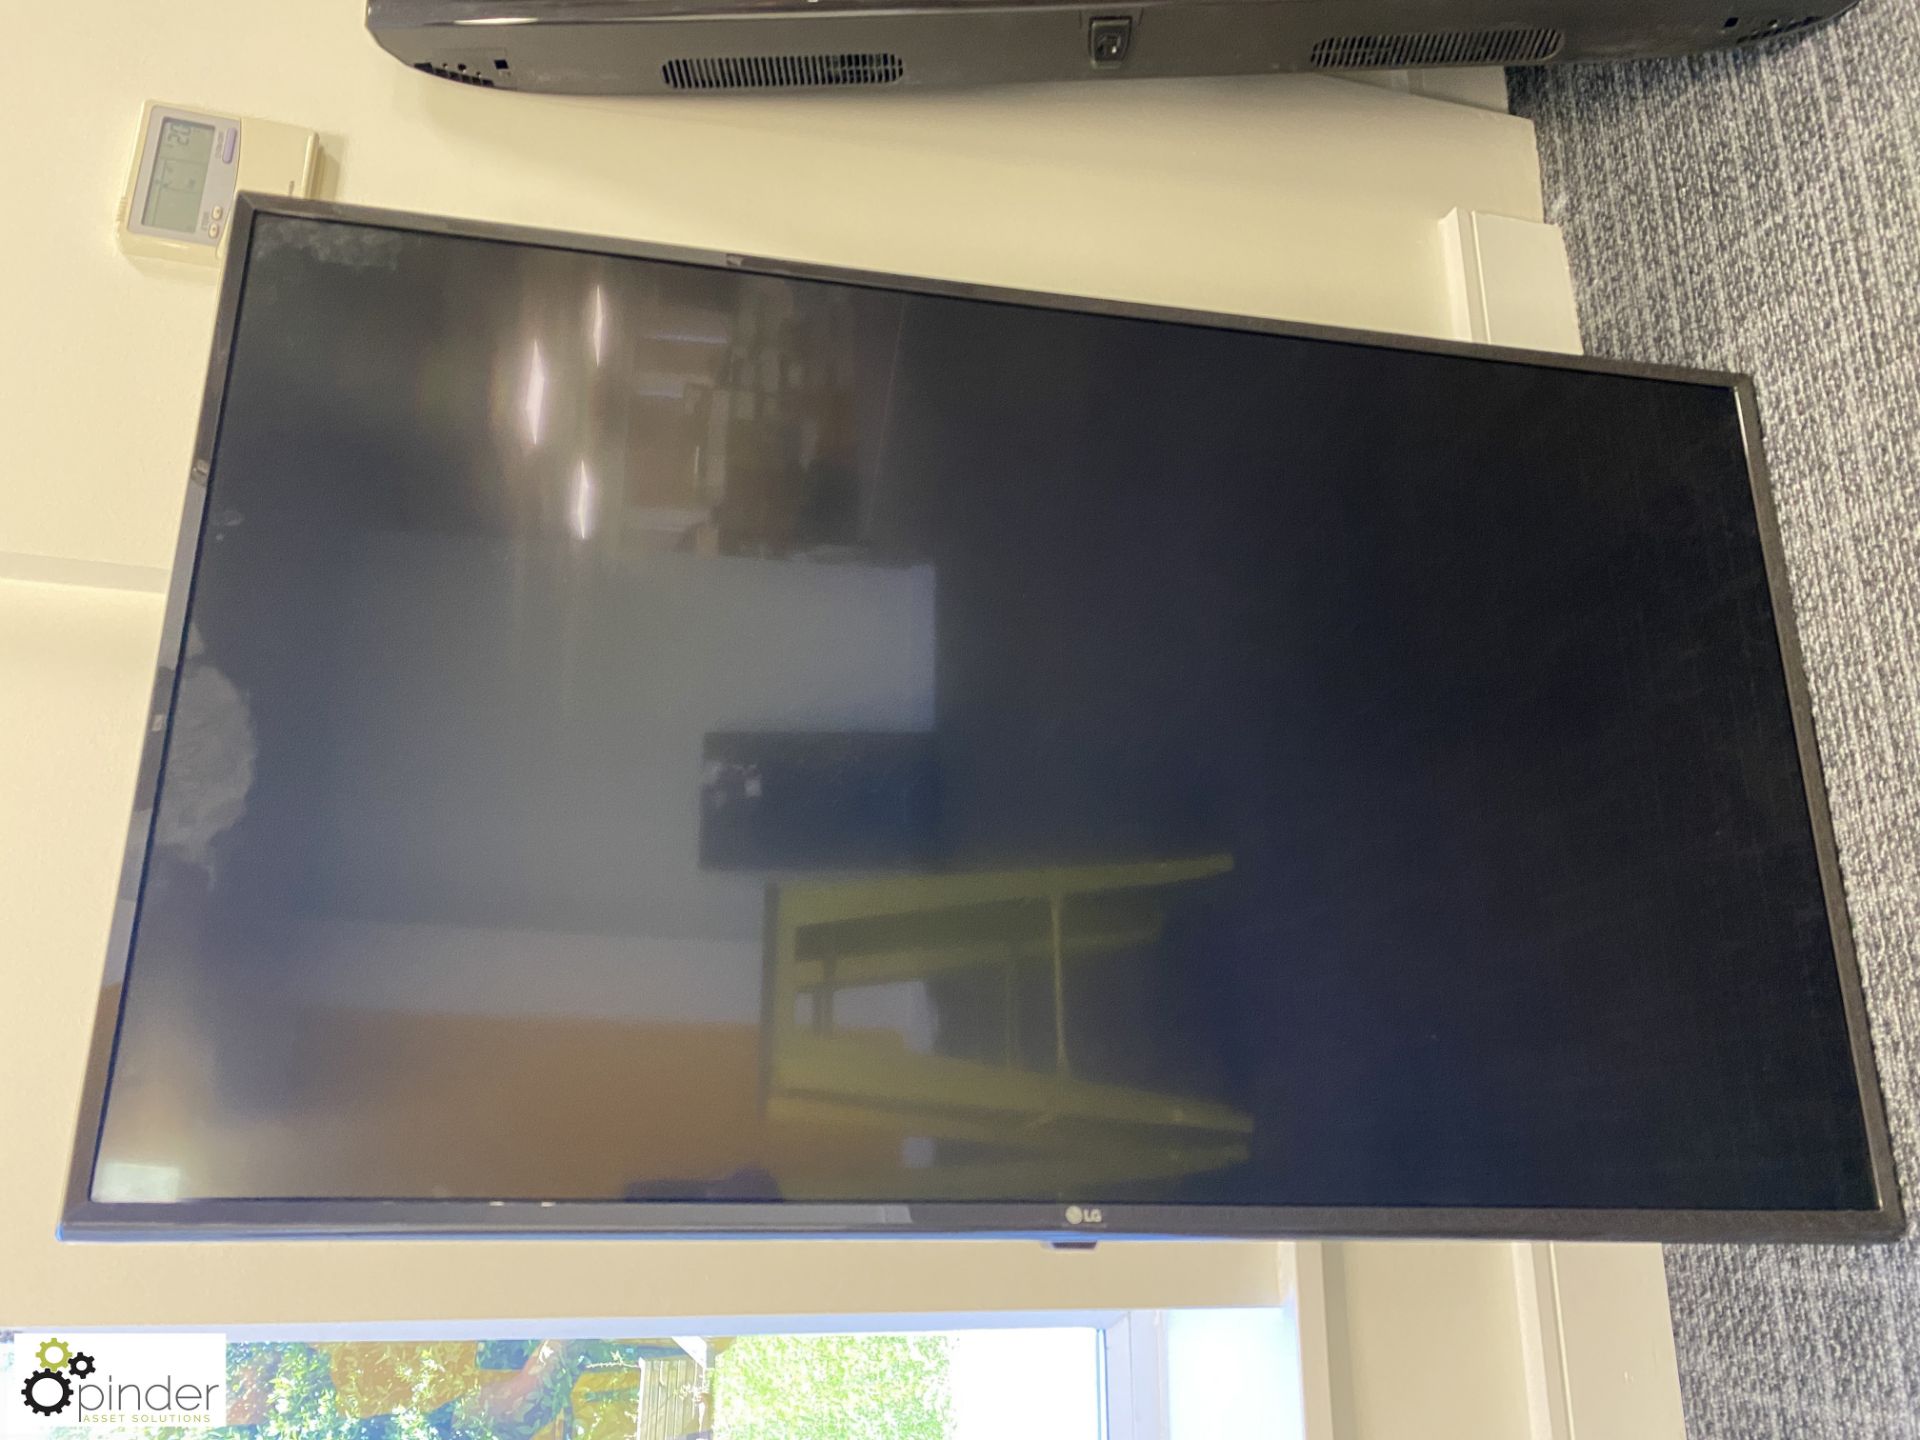 LG 49UJ630V TV with wall bracket and remote (ground floor breakout/café) - Image 5 of 6